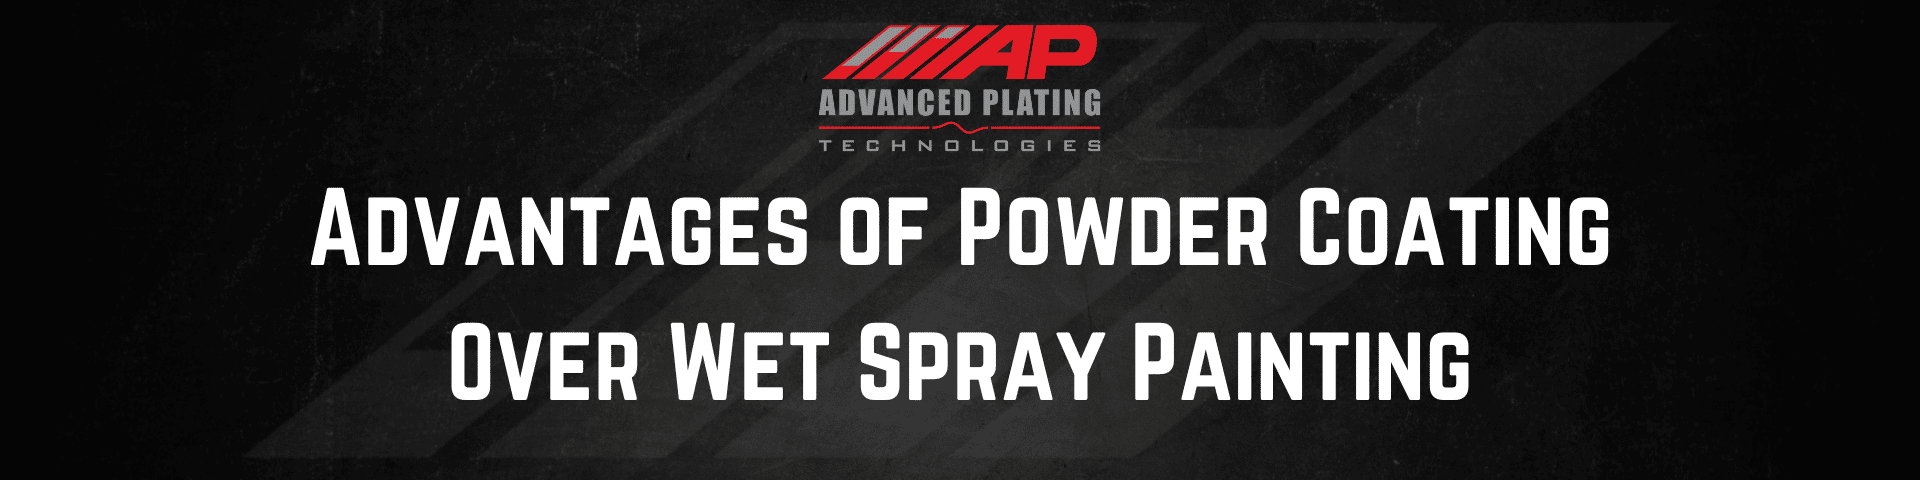 Advantages of Powder Coating over Wet Spray Painting